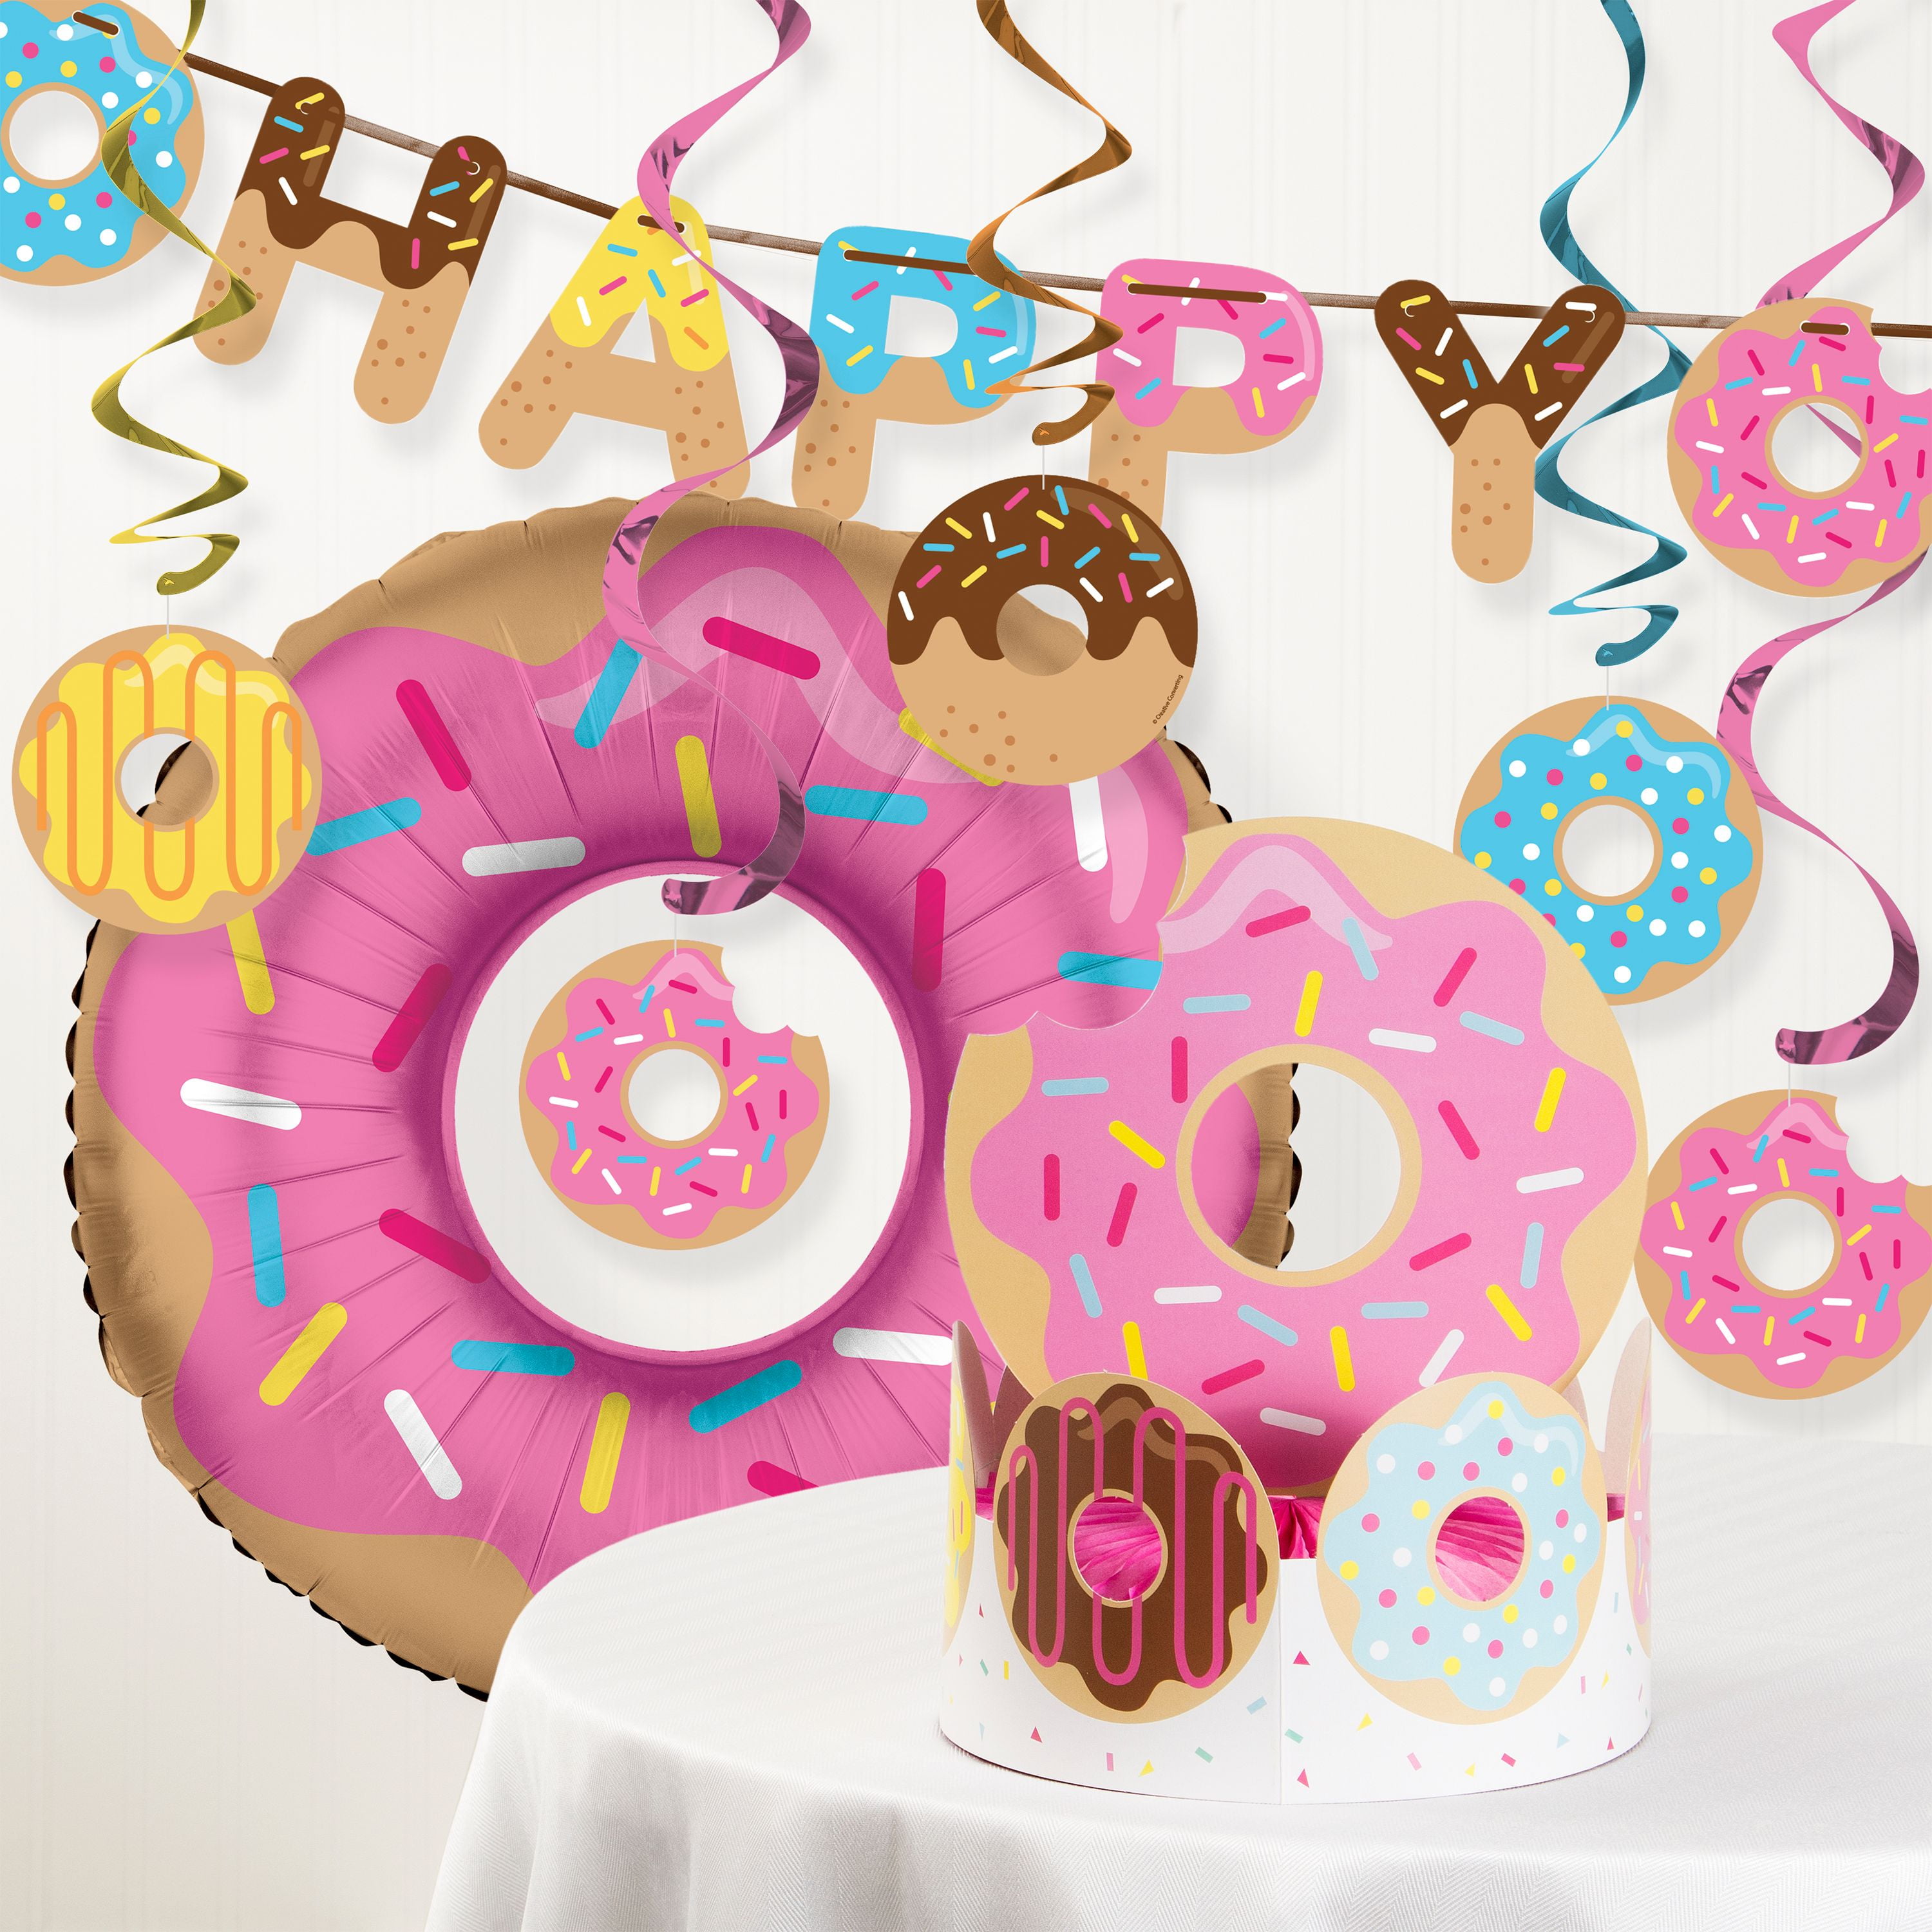 Donut Themed Birthday Party Decorations Set,Happy Birthday Banner Garland Kit,Ultimate Party Favors Pack for Boys Girls Women